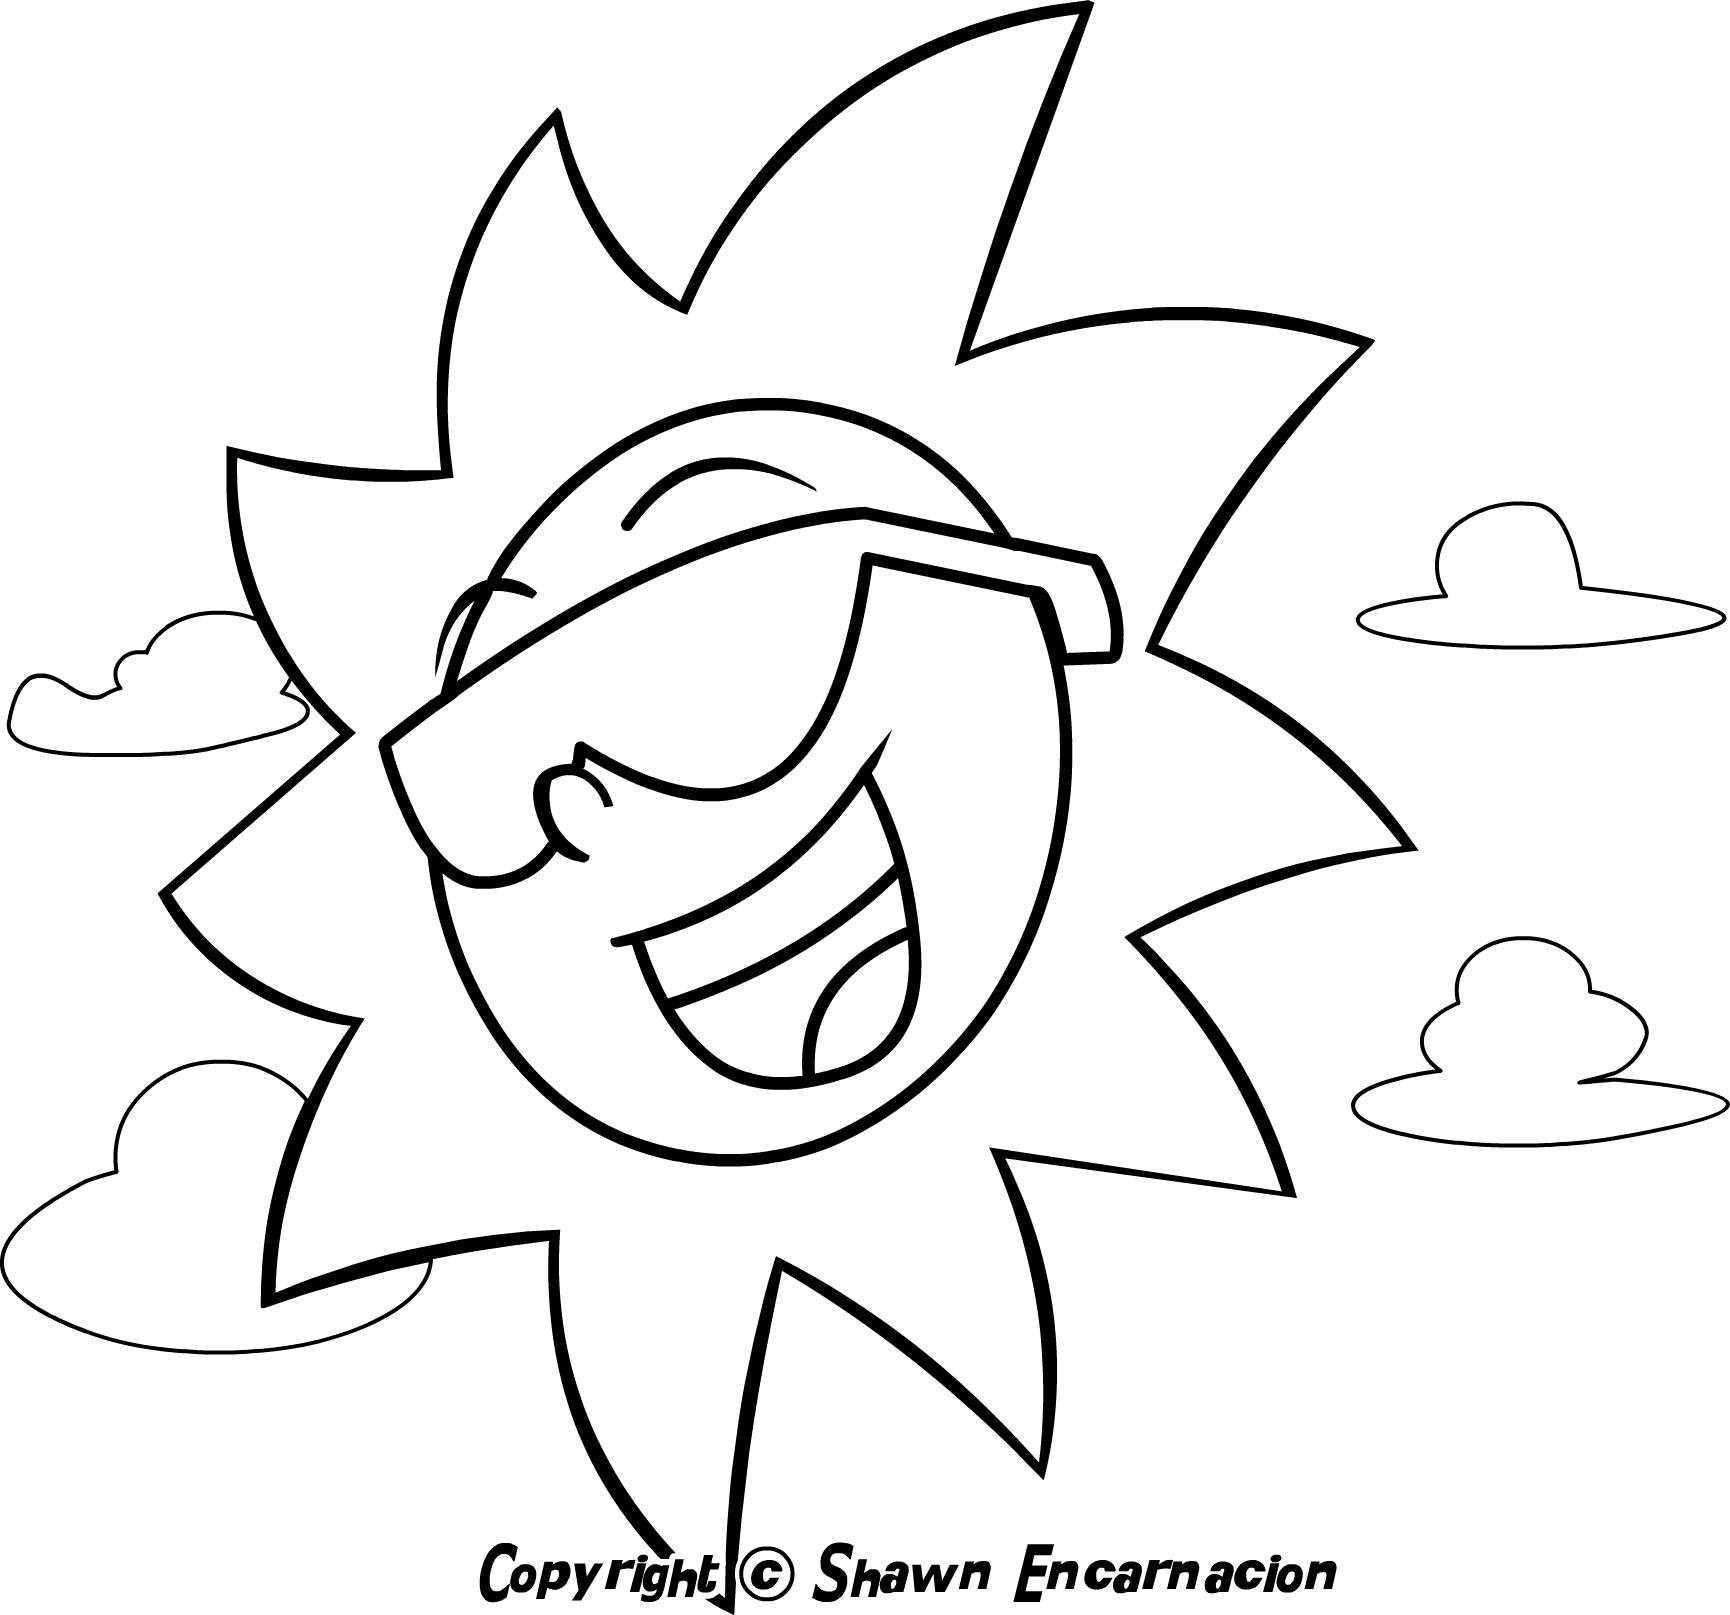 Sun coloring pages to download and print for free